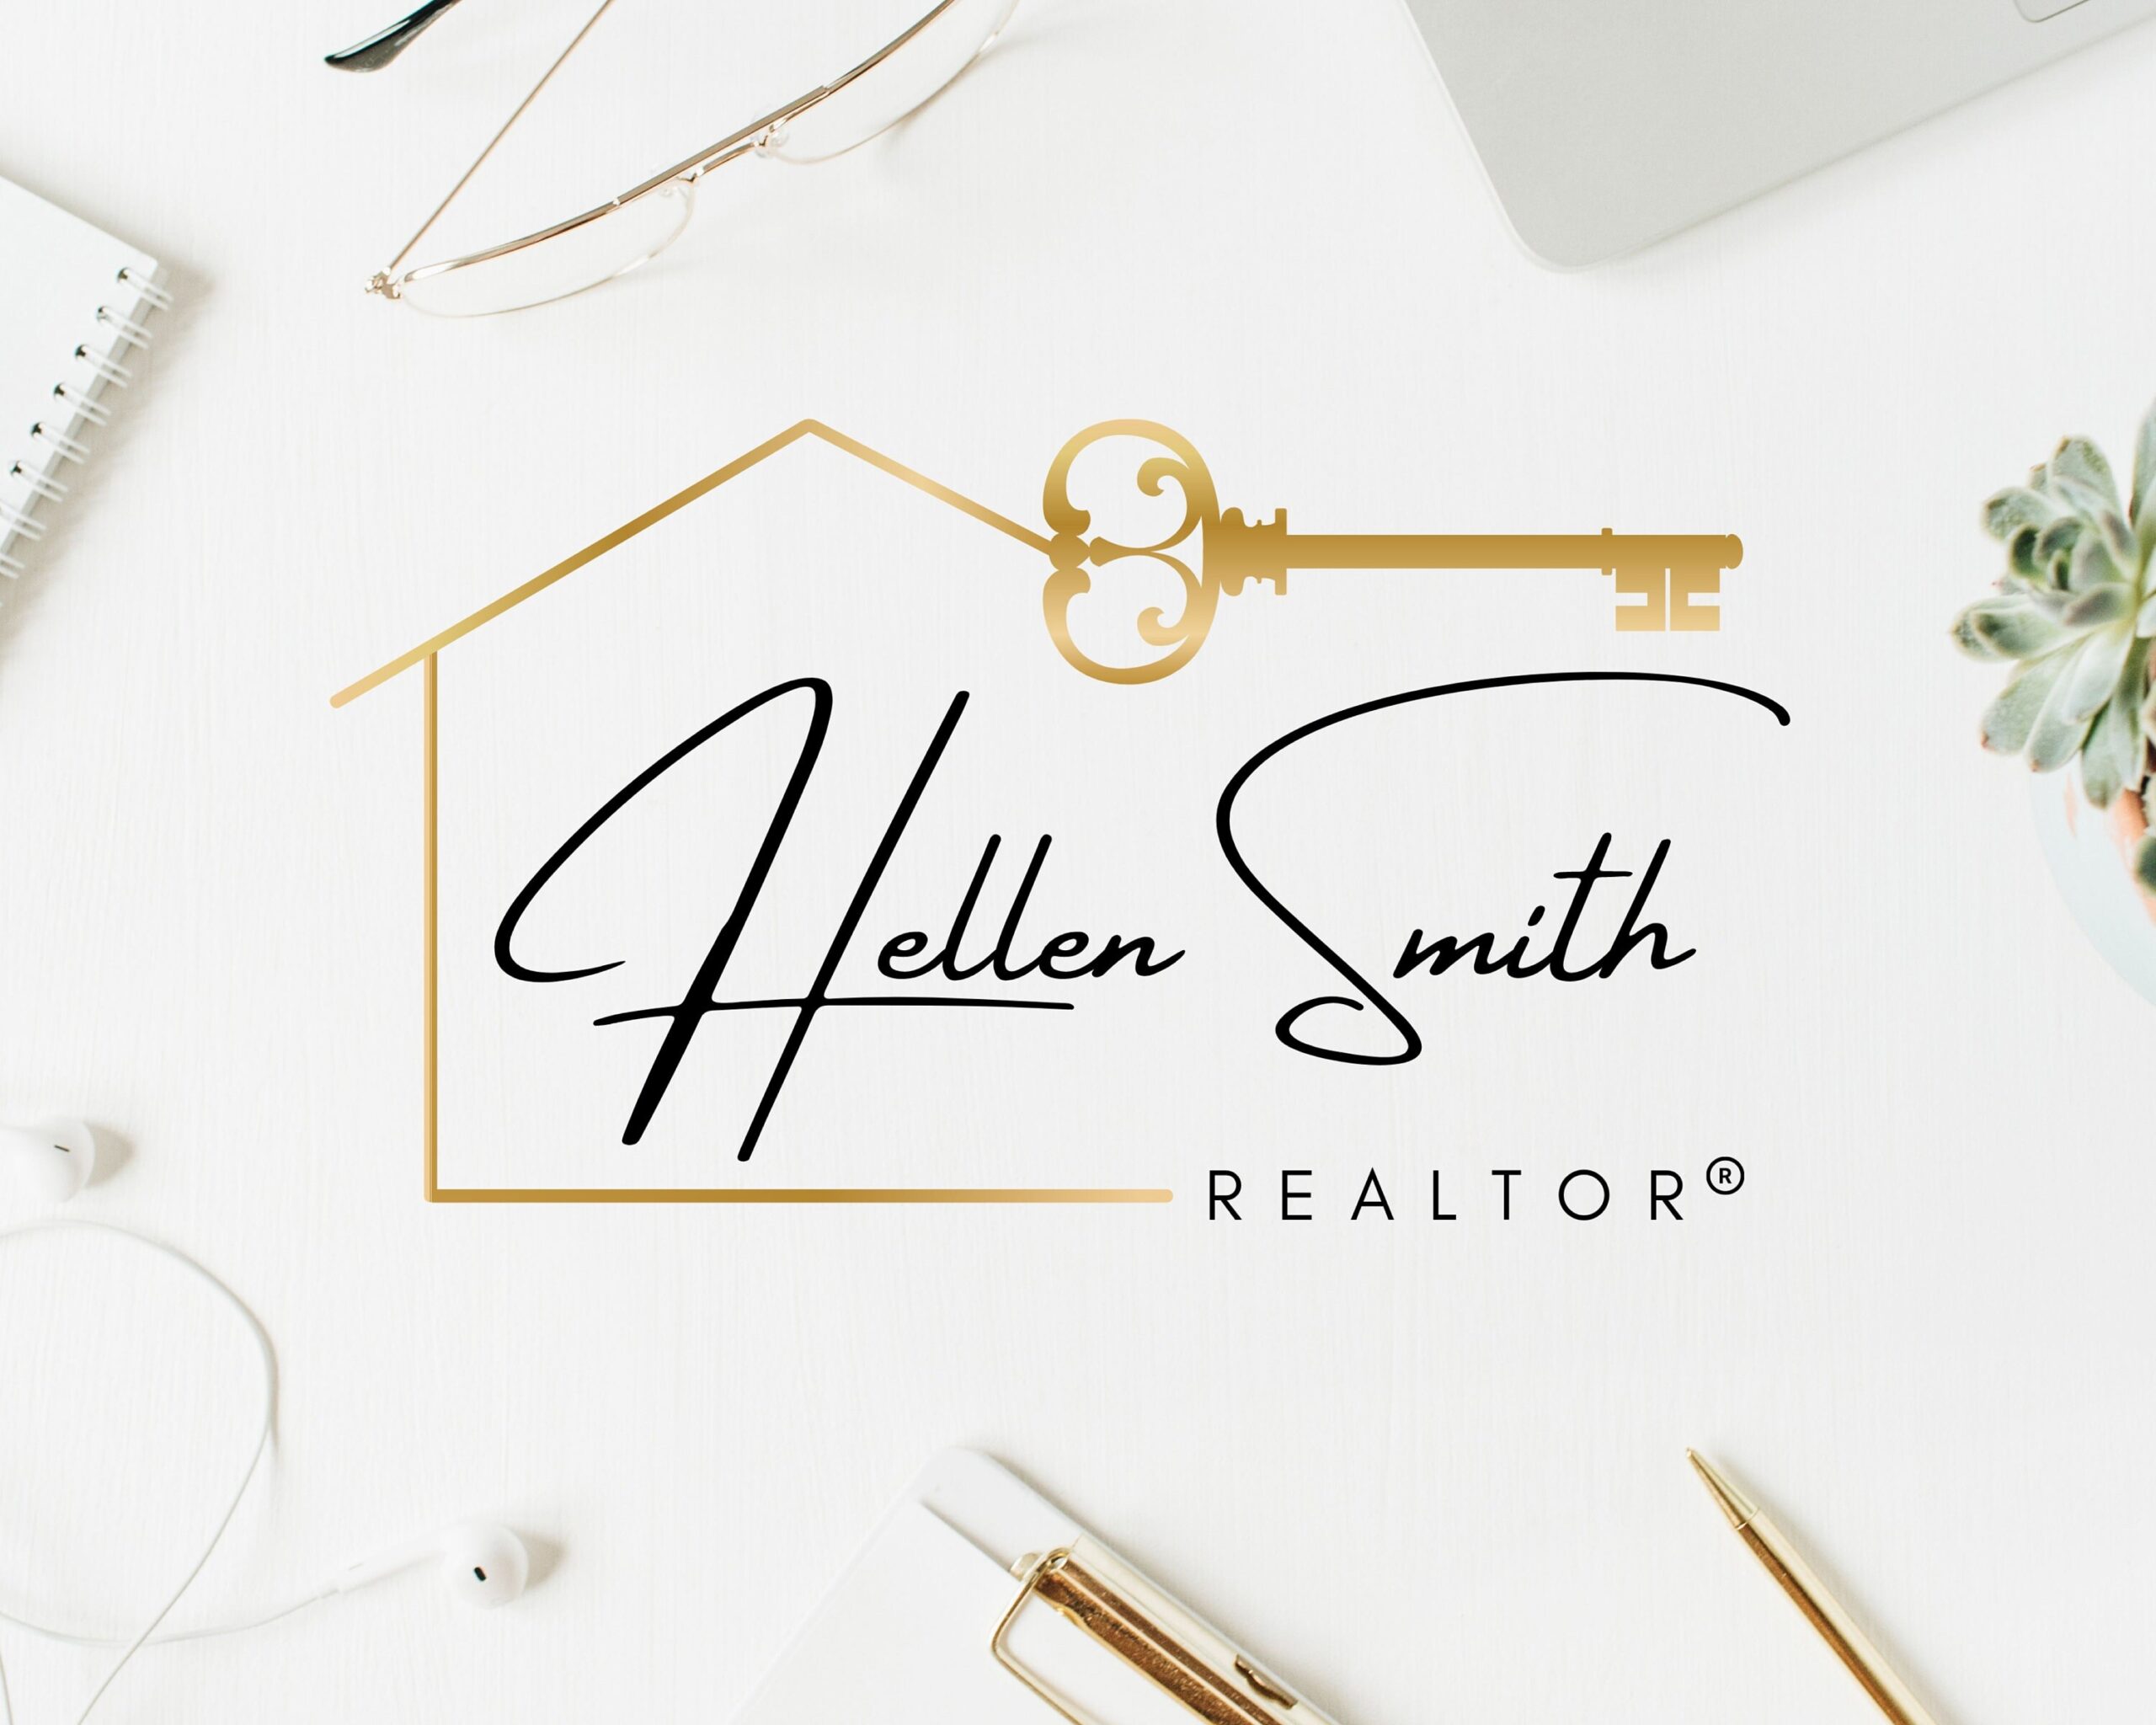 Premade REALTOR? Logo Design for Real Estate Agents -  Golden Classic Key Logo -  Submark and Watermark. I'll add Your Business Name and Tagline